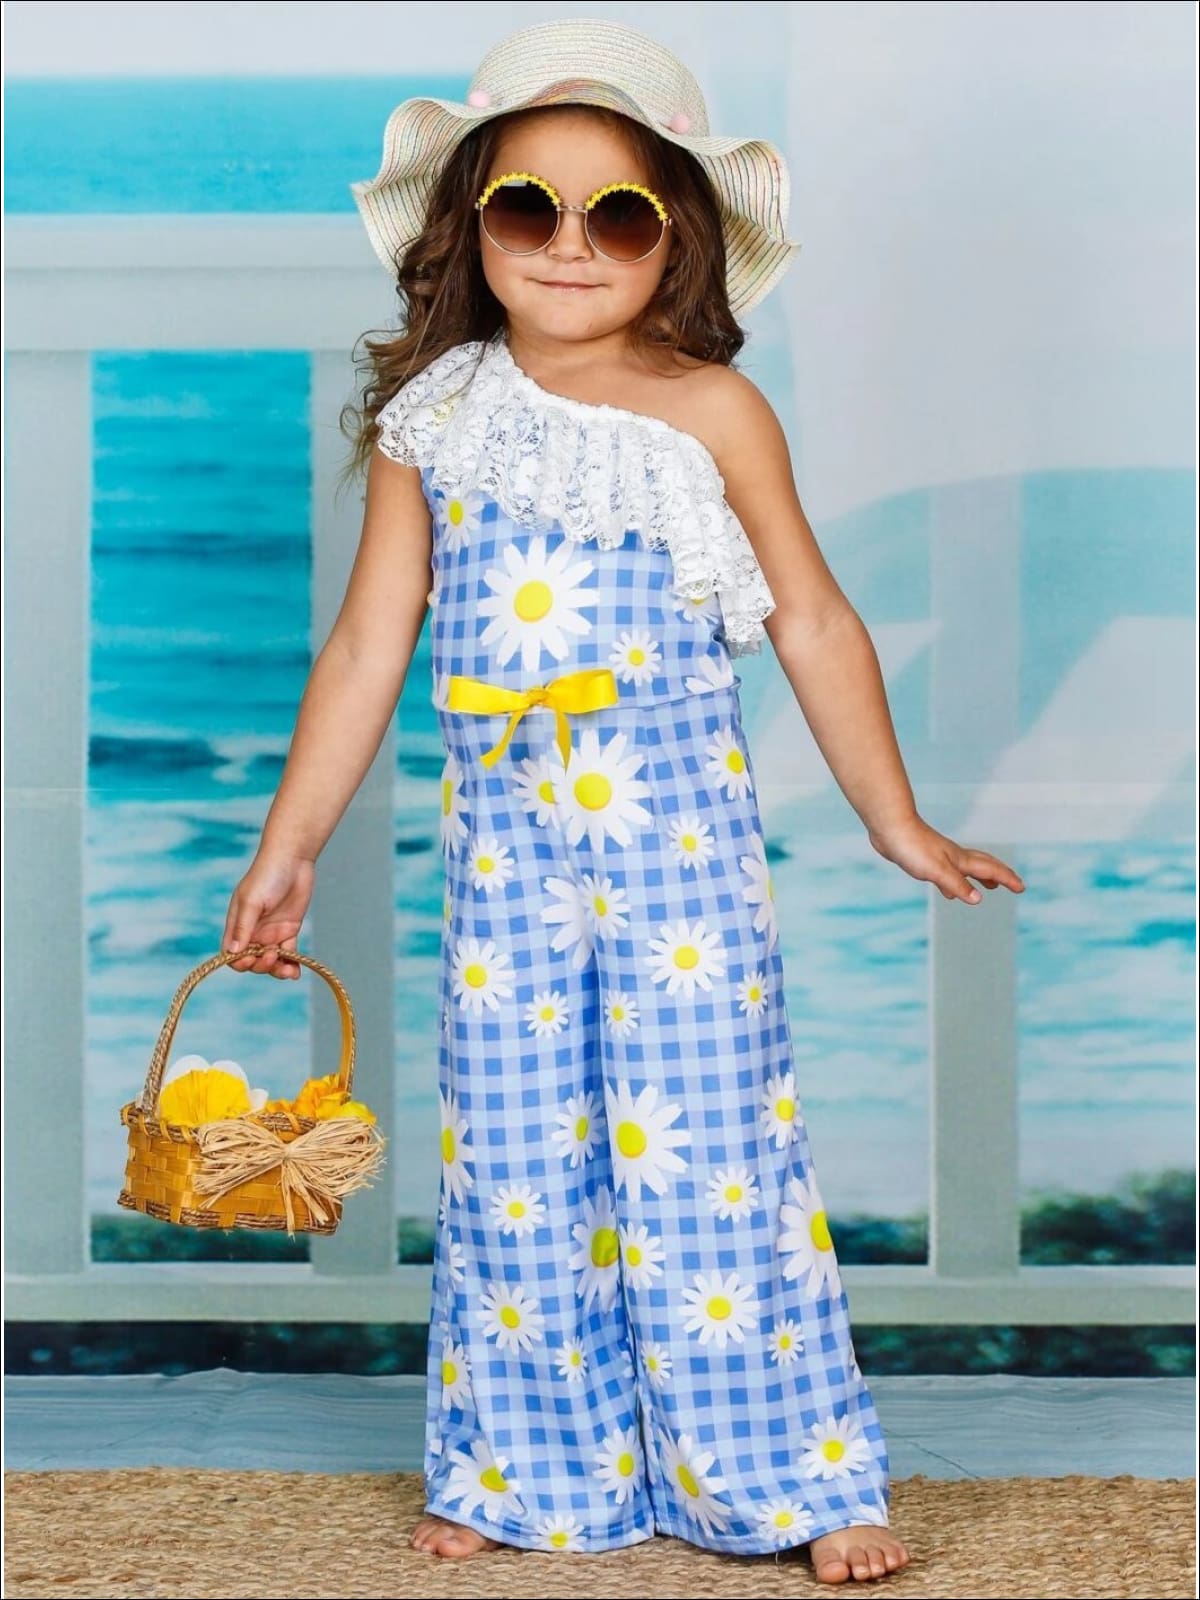 Toddler Spring Outfits | Girls Lace Bib One Shoulder Palazzo Jumpsuit